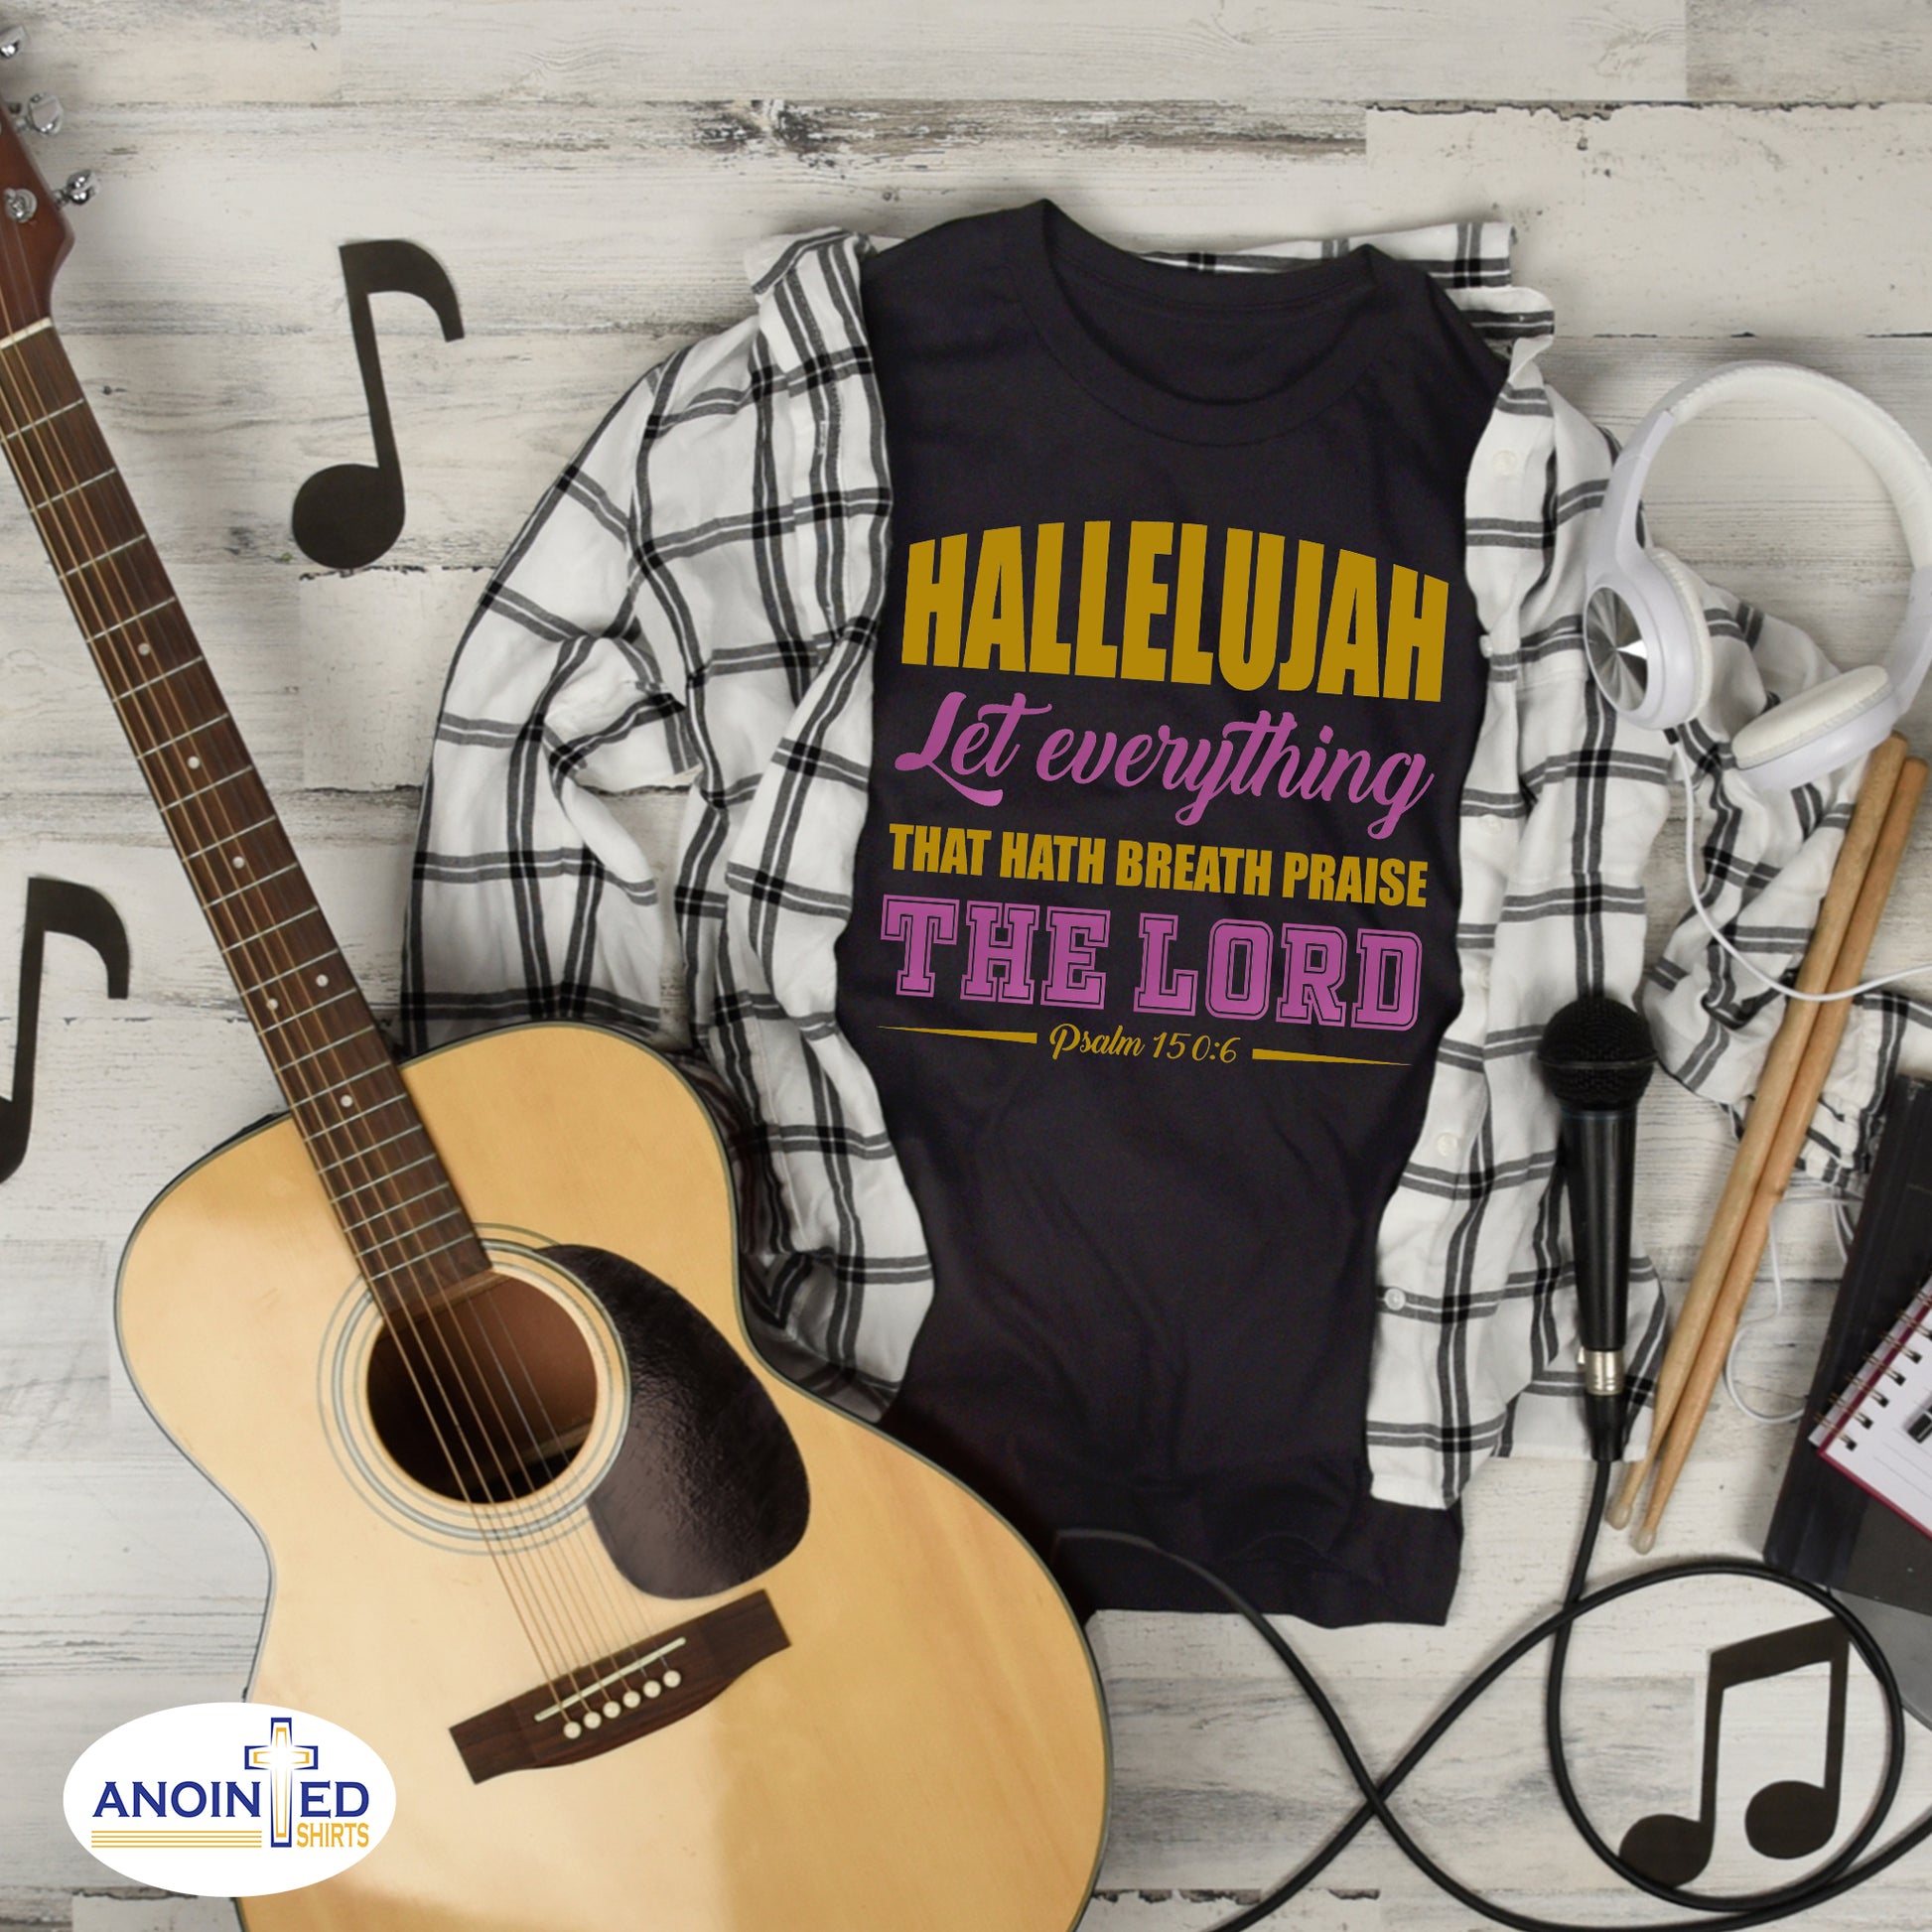 Hallelujah Christian Tee - Gold - Christian - t shirt - Anointed T Shirts